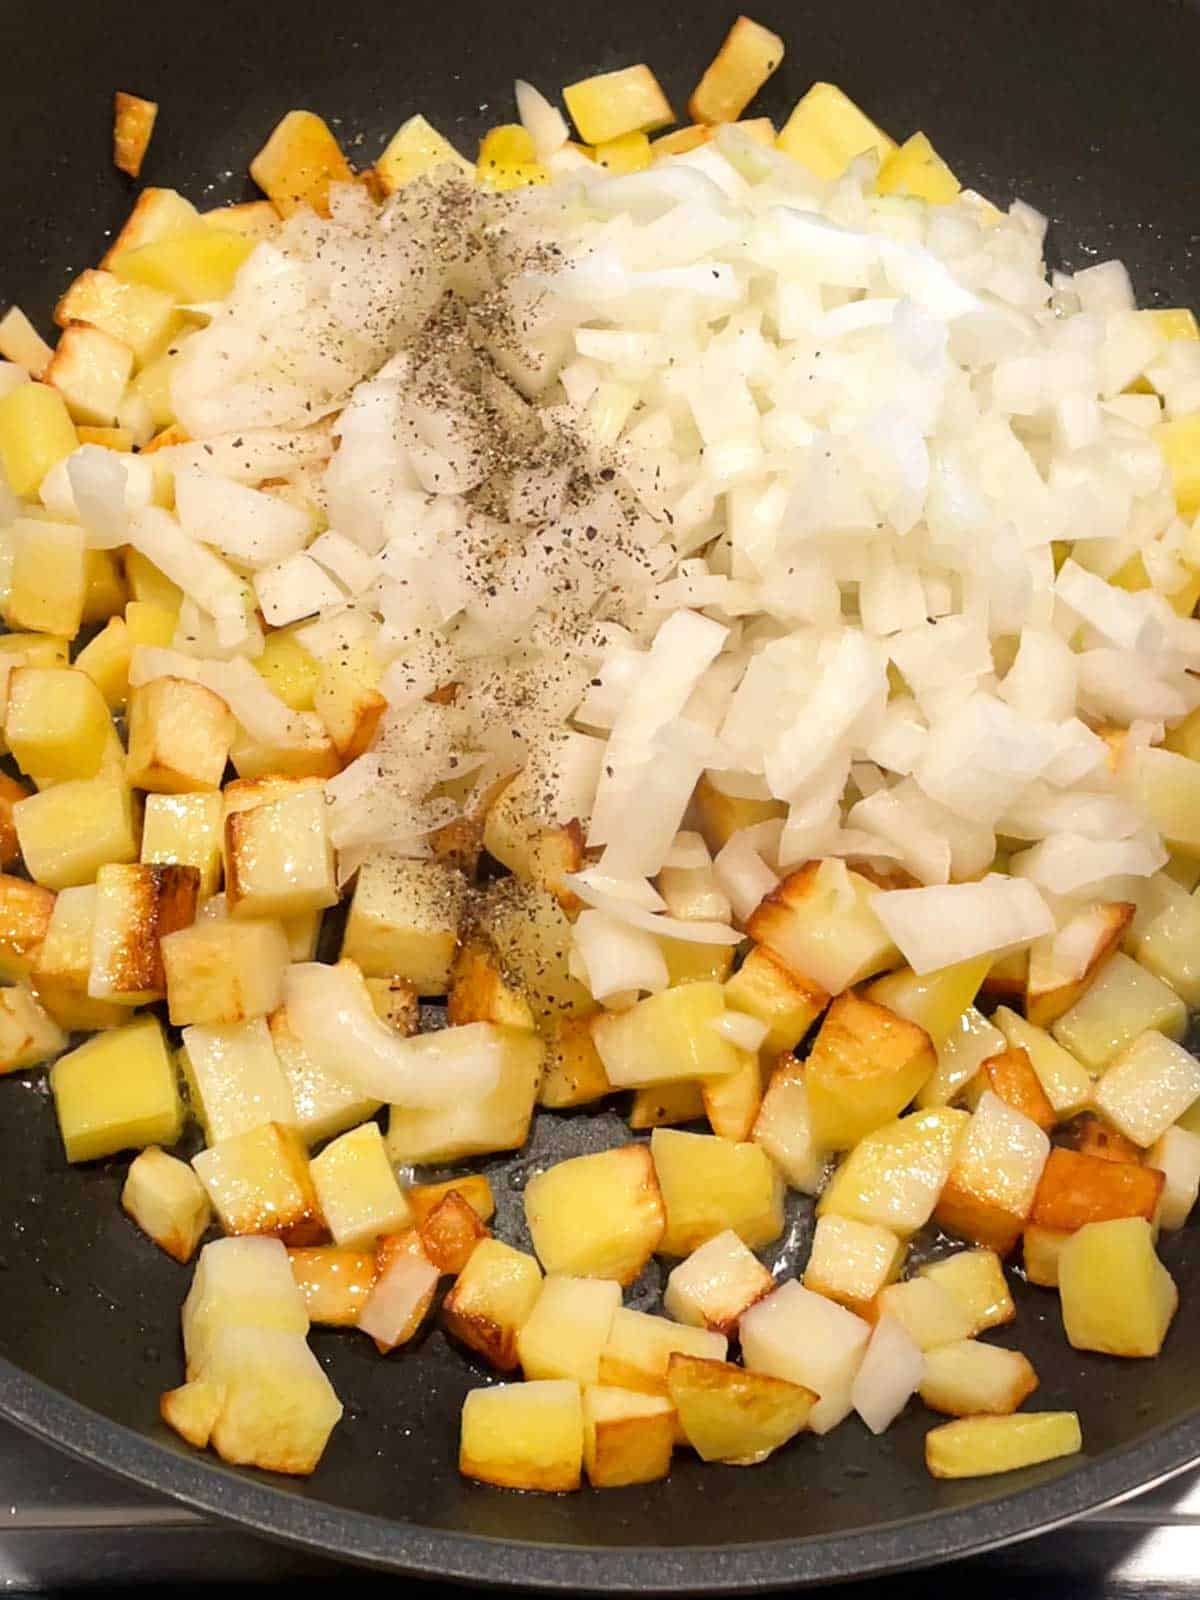 Potatoes with onions and pepper added.